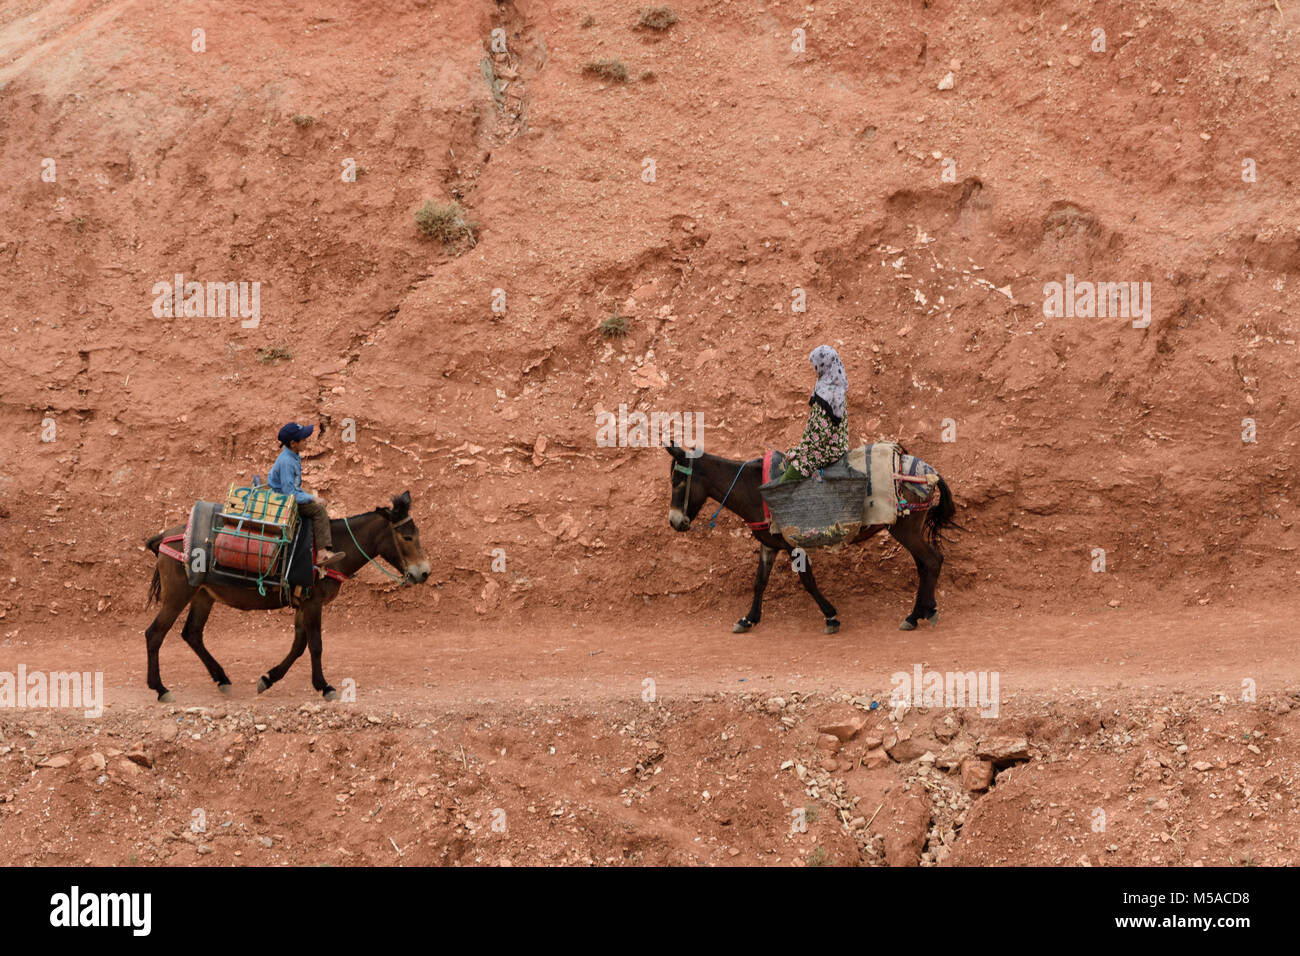 North Africa, Africa, African, Morocco, Moroccan, girl and boy on donkey Stock Photo